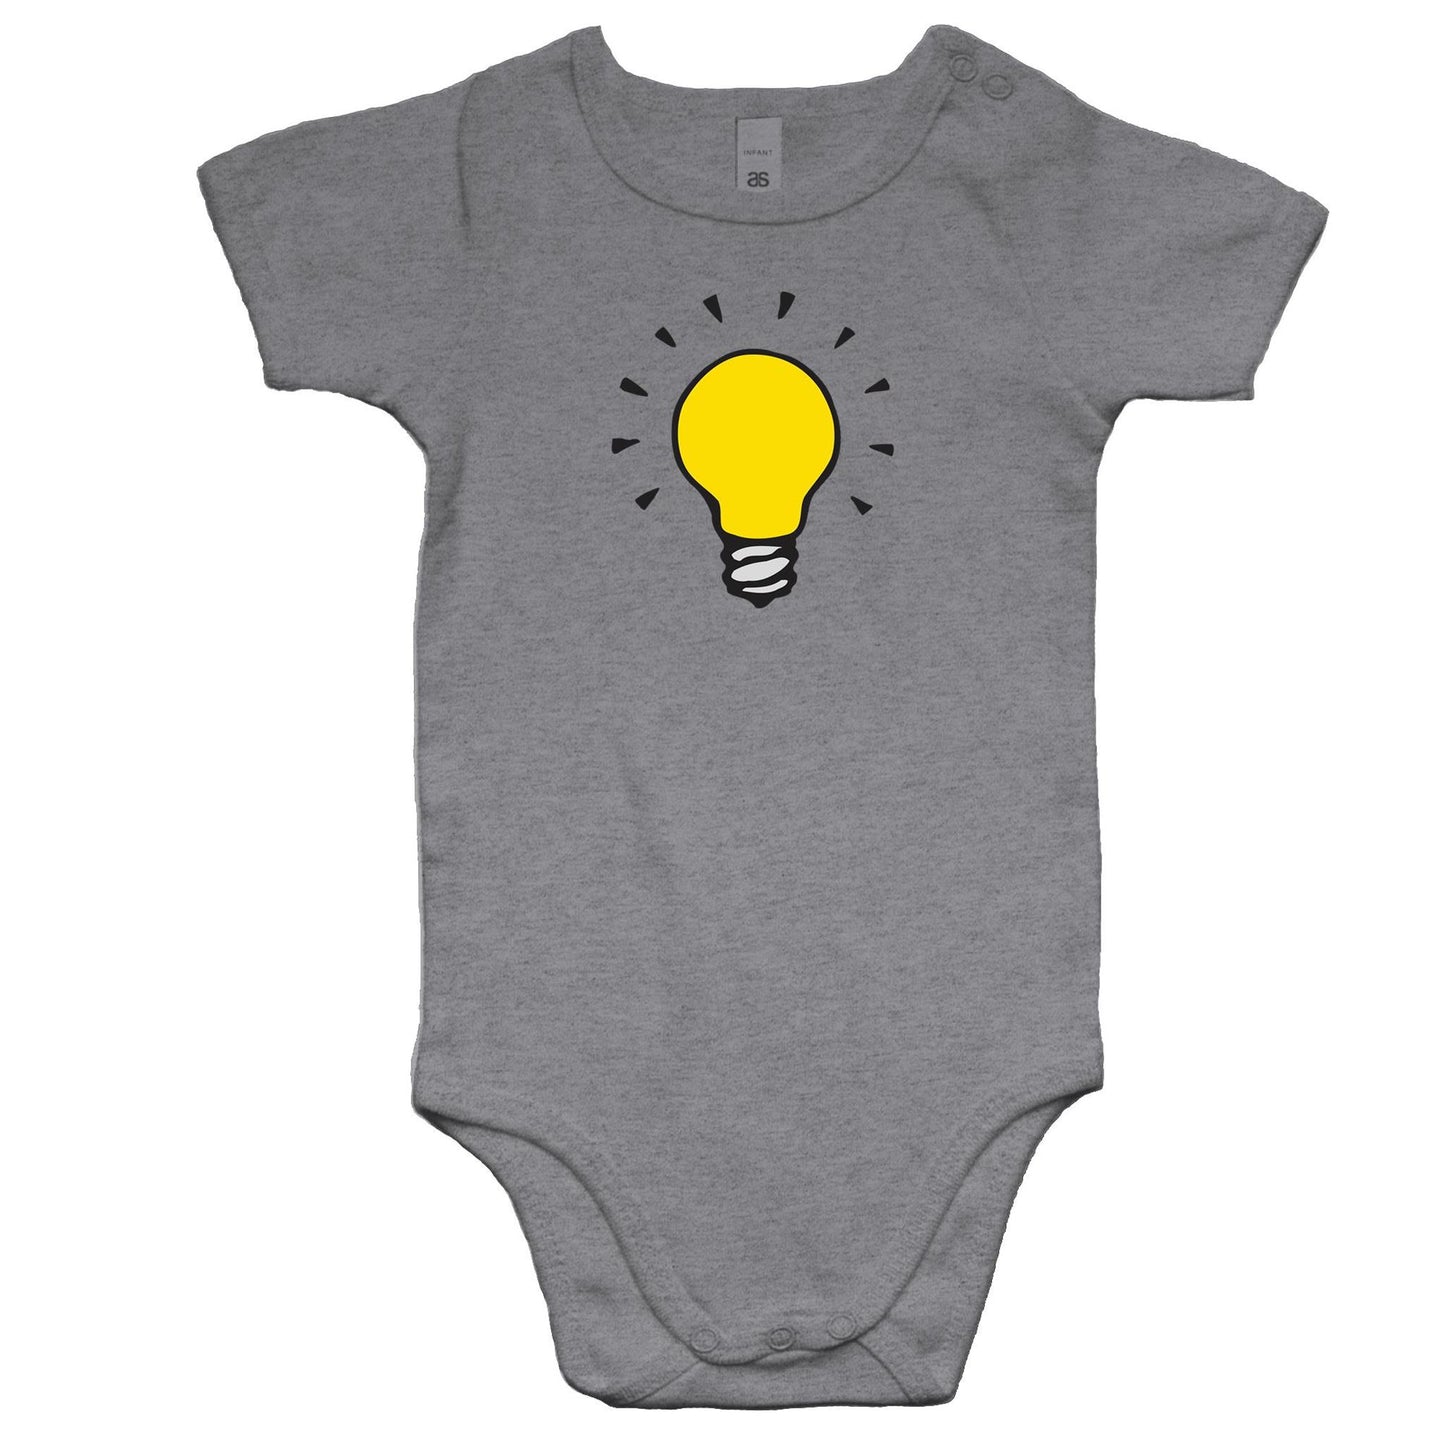 Light Bulb Rompers for Babies